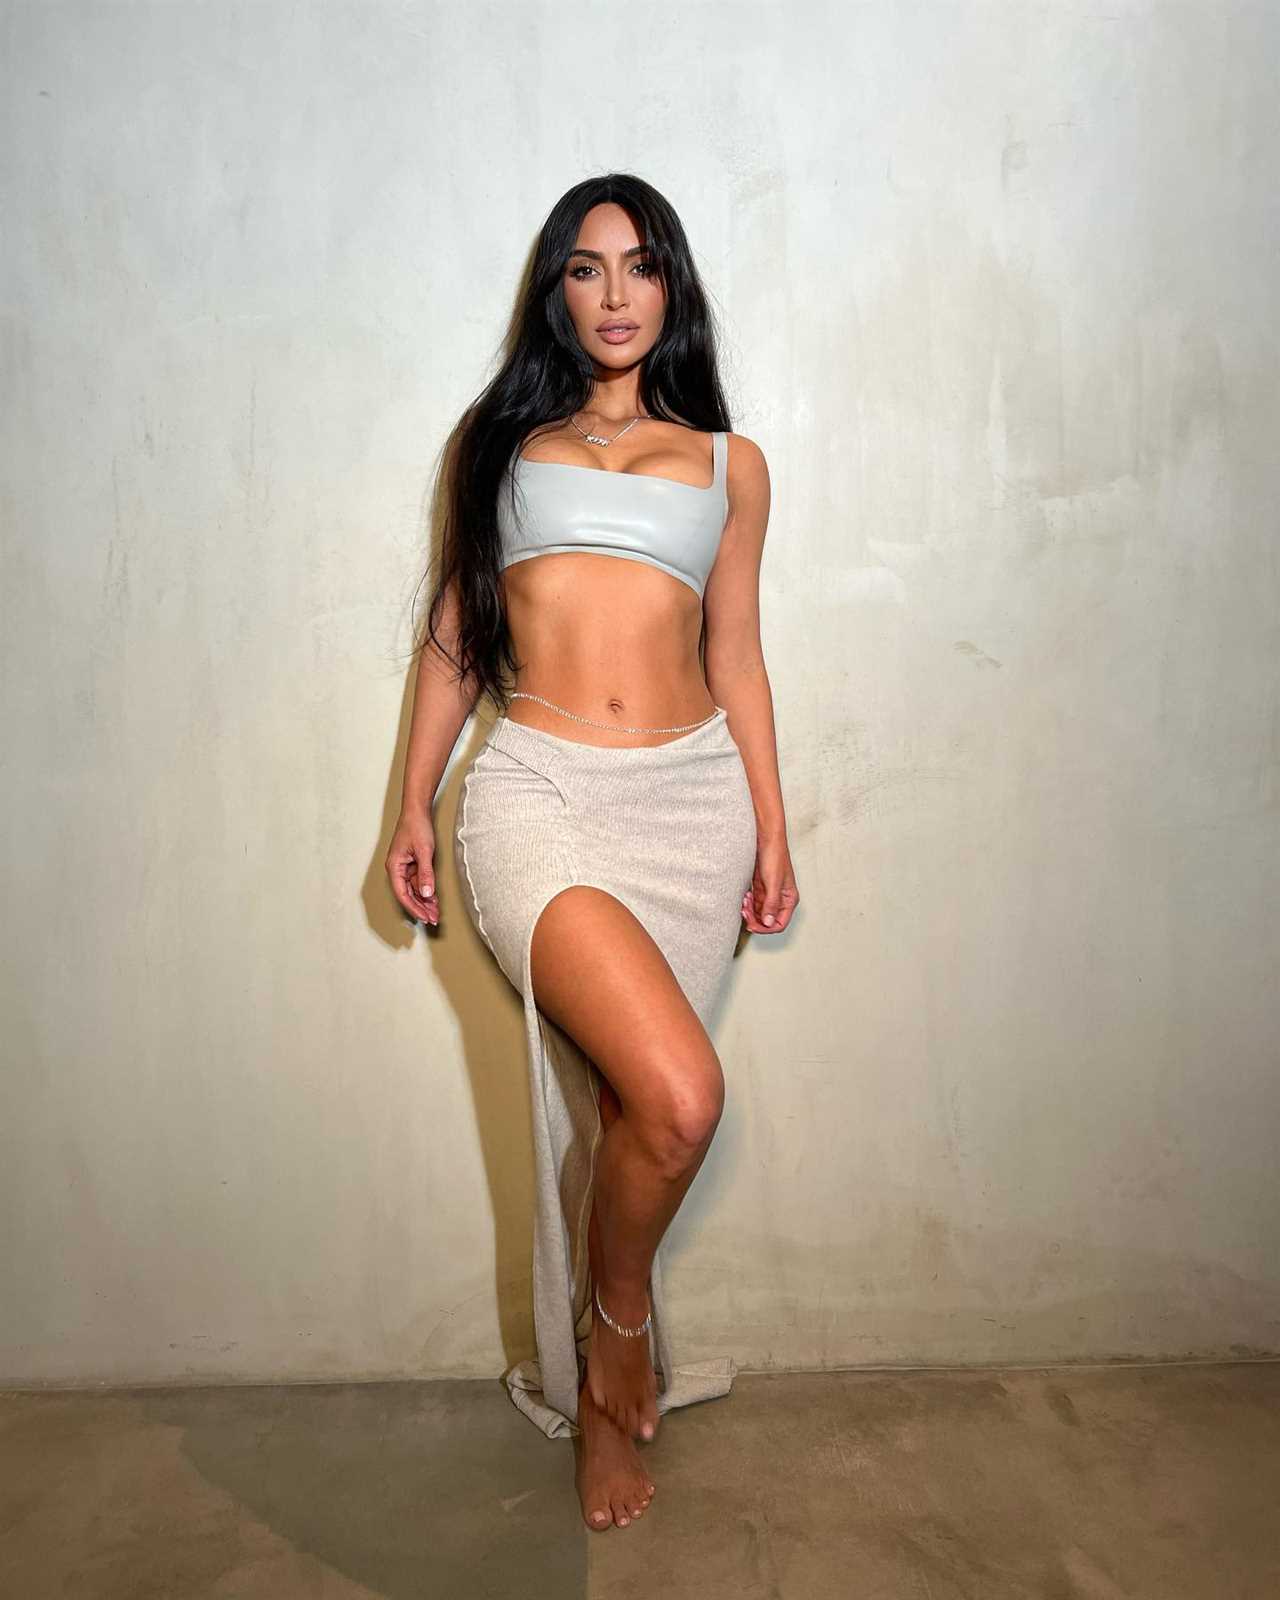 Kim Kardashian shows off her curves in see-through lace dress for sexy pic after fans claim she got ‘secret procedure’